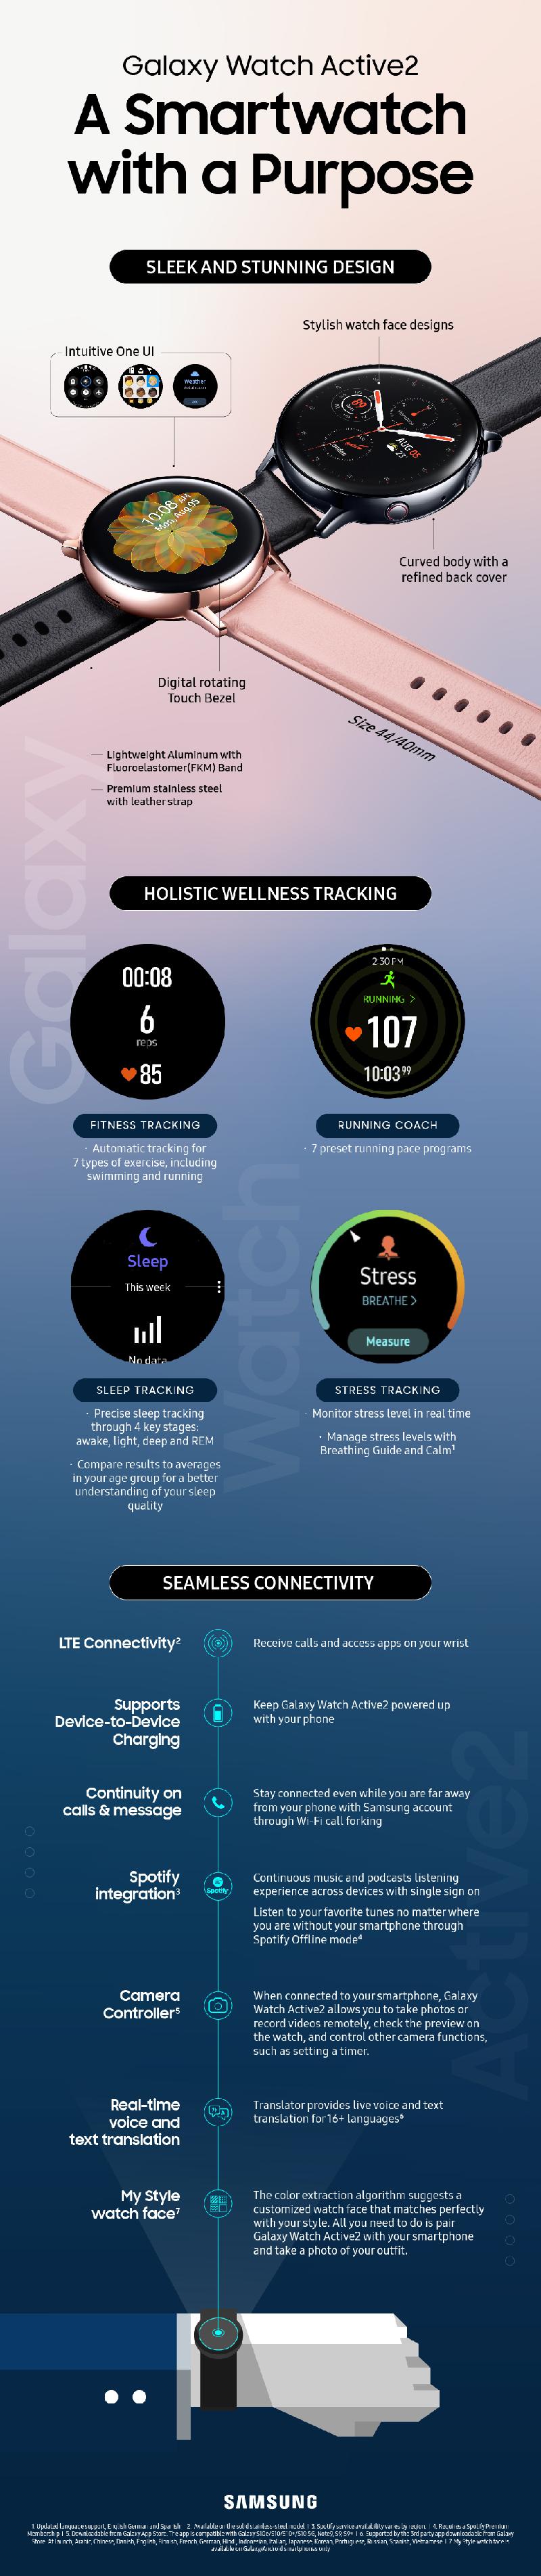 Galaxy-Watch-Active2_A-Smartwatch-with-a-Purpose_infographic-3.jpg